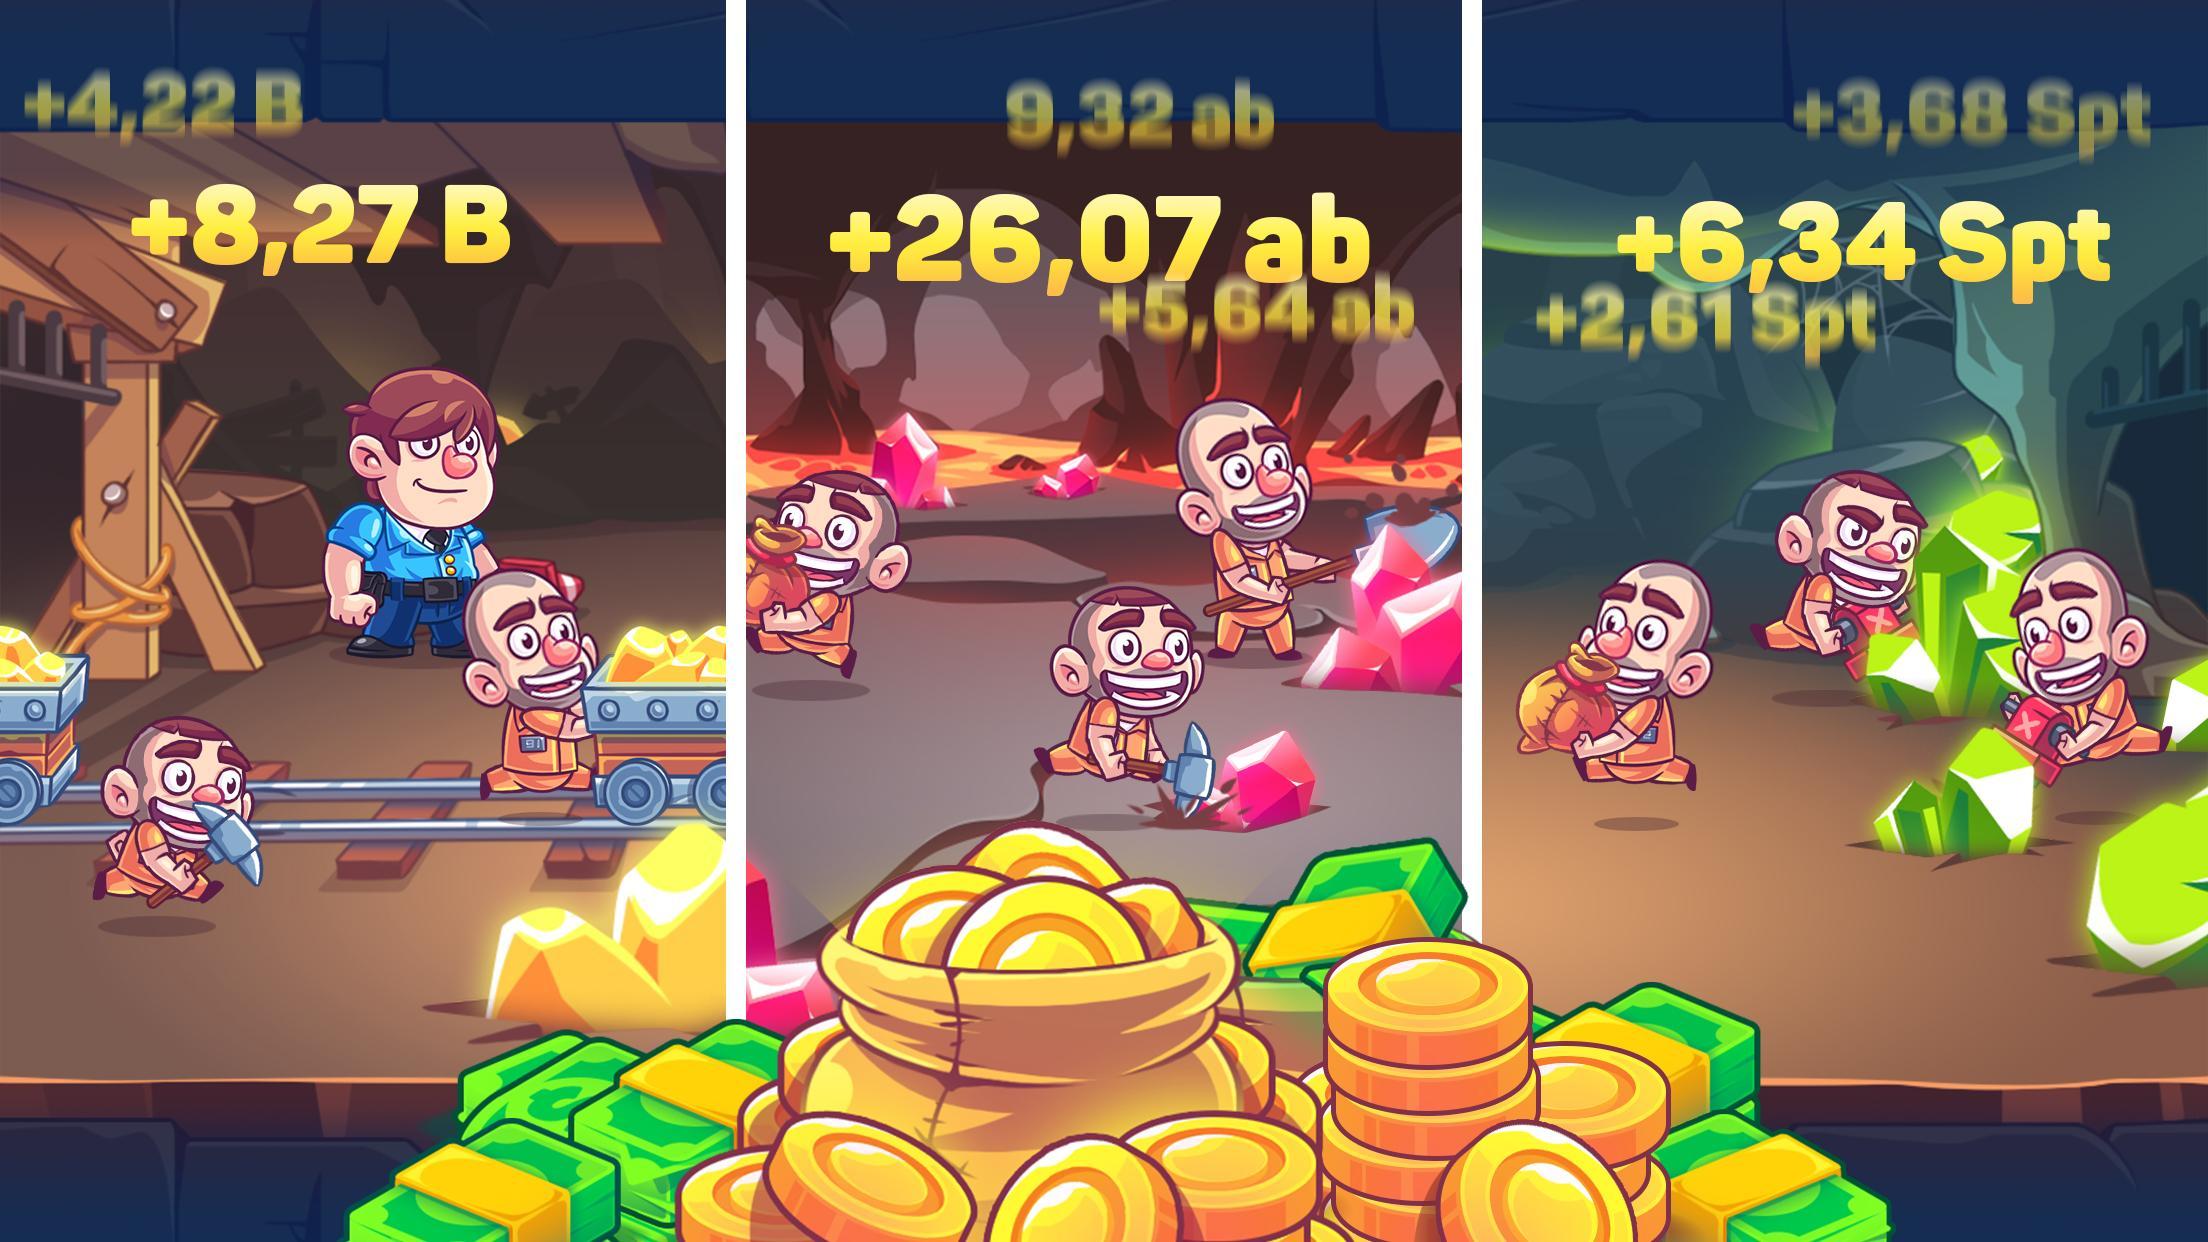 Screenshot 1 of Idle Prison Tycoon: Gold Miner Clicker 遊戲 1.5.4